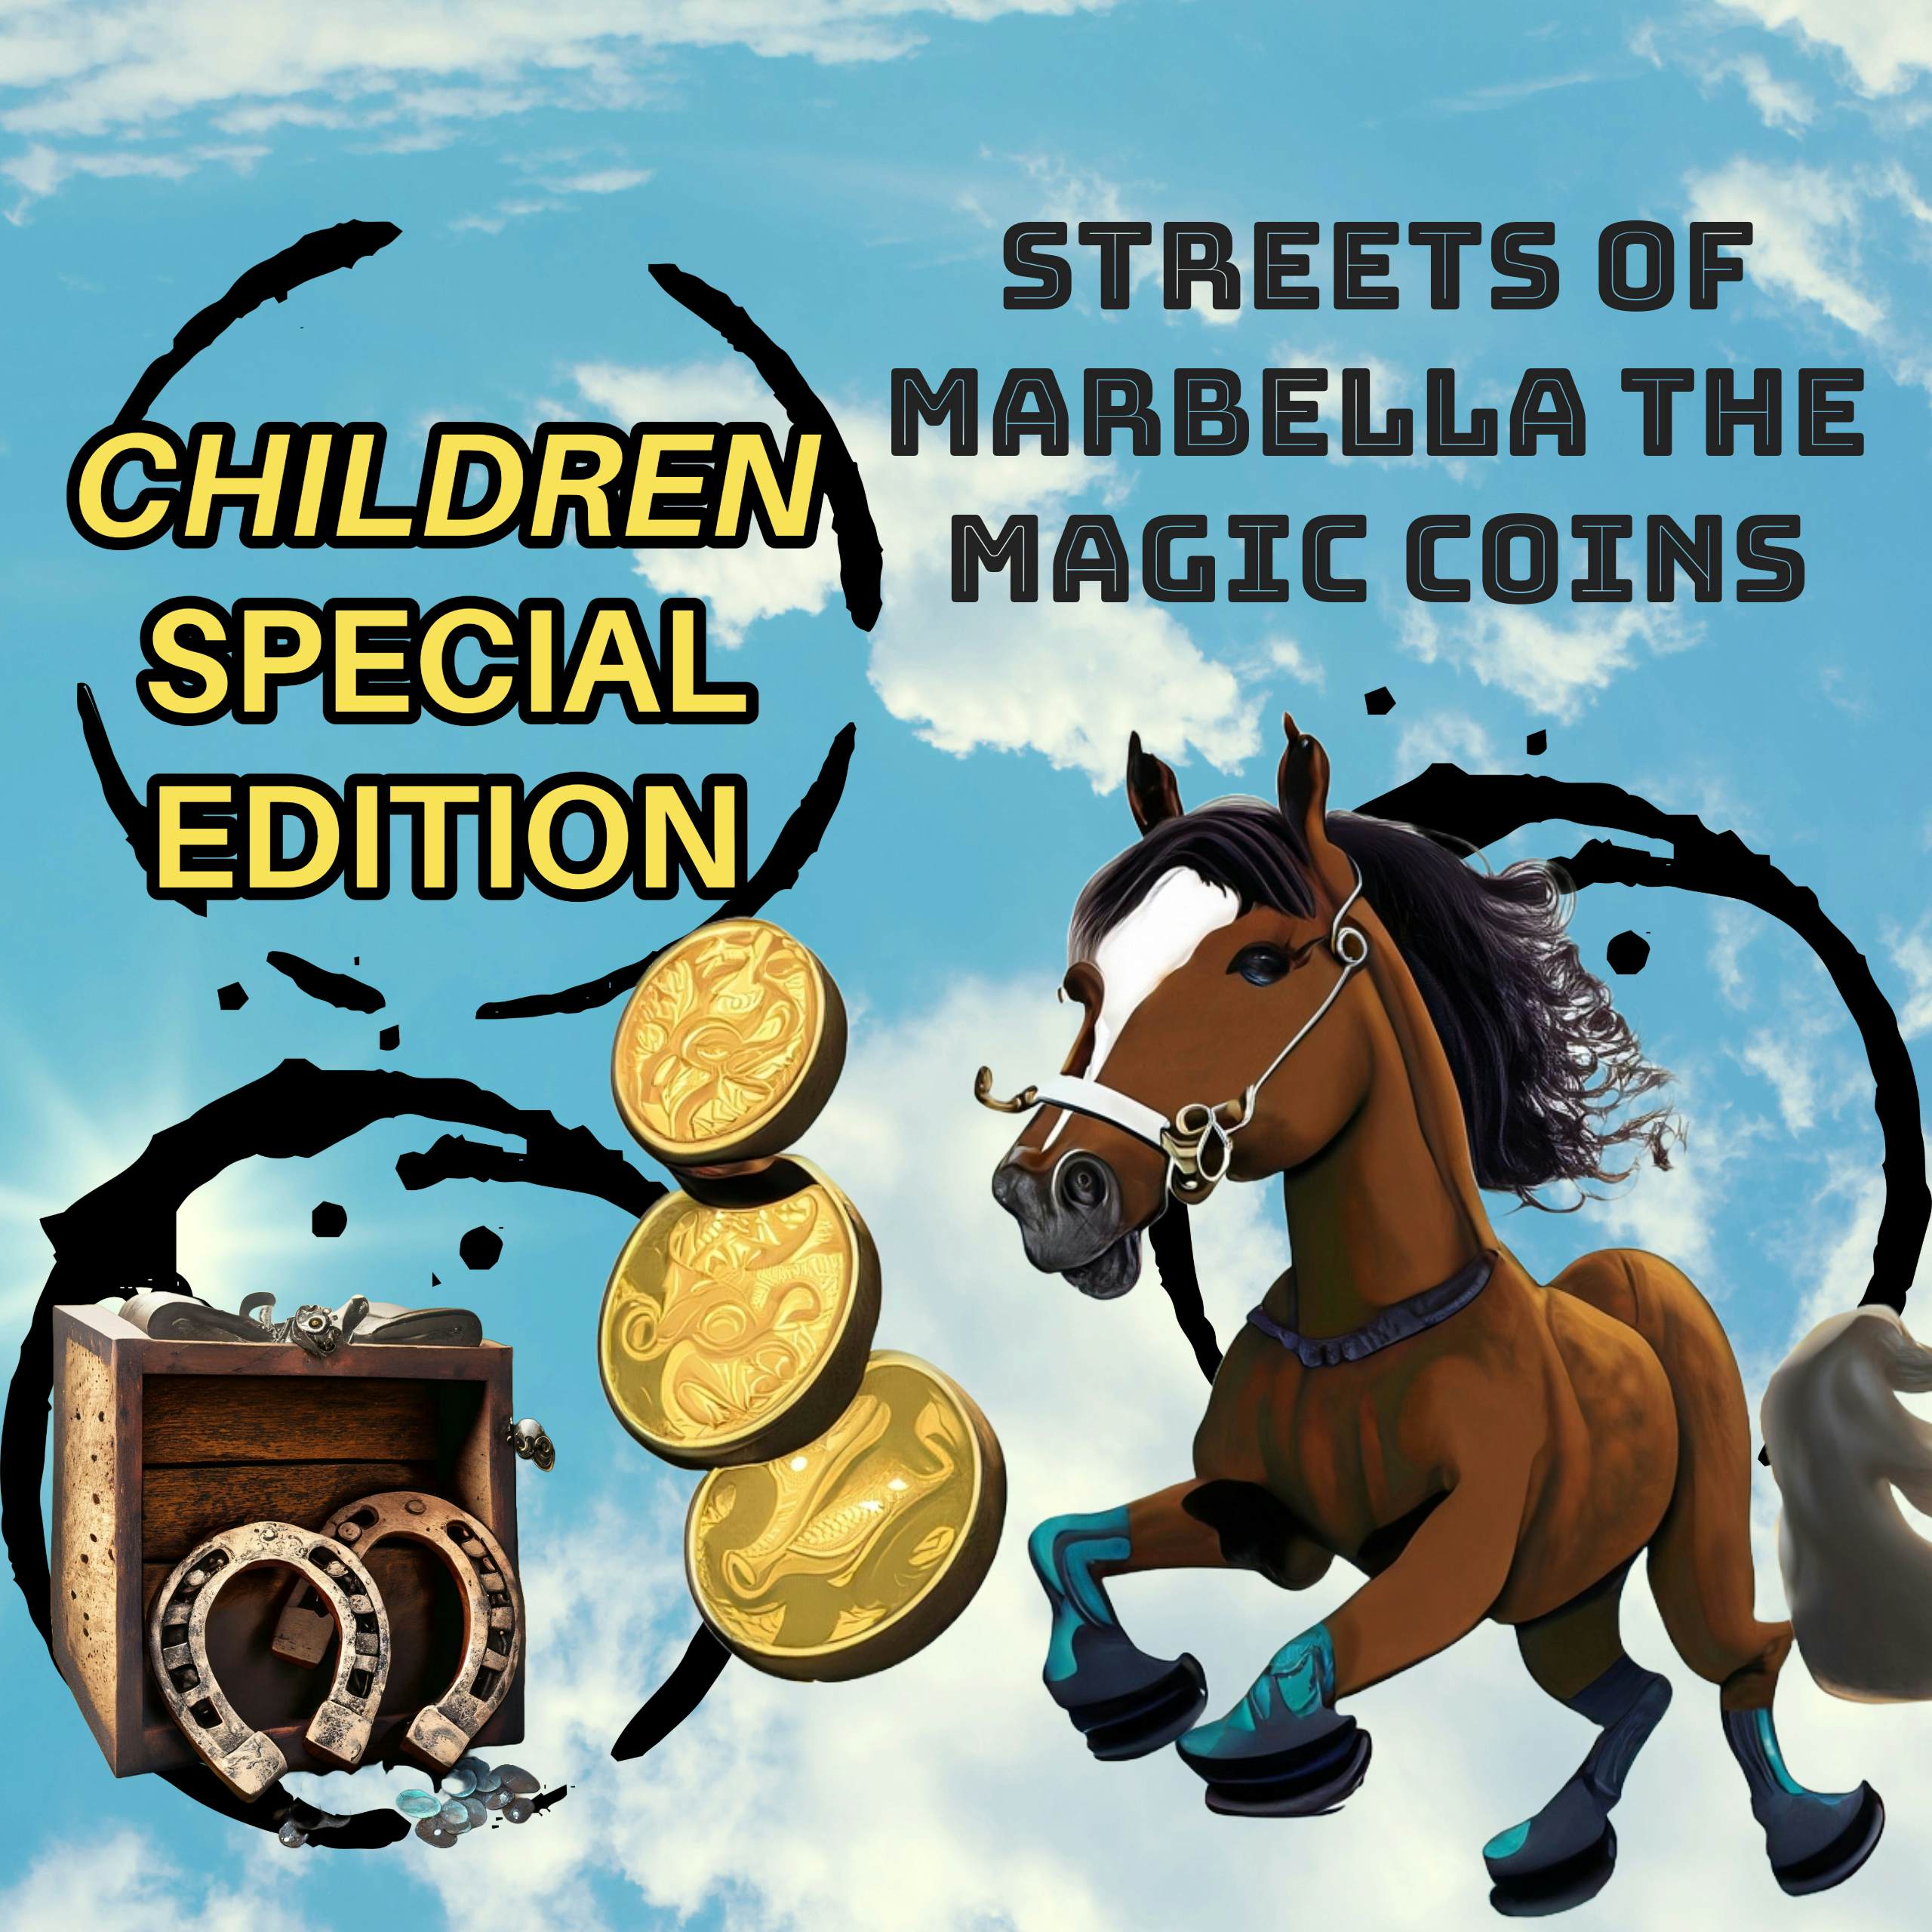 Streets of Marbella: The magic coins image